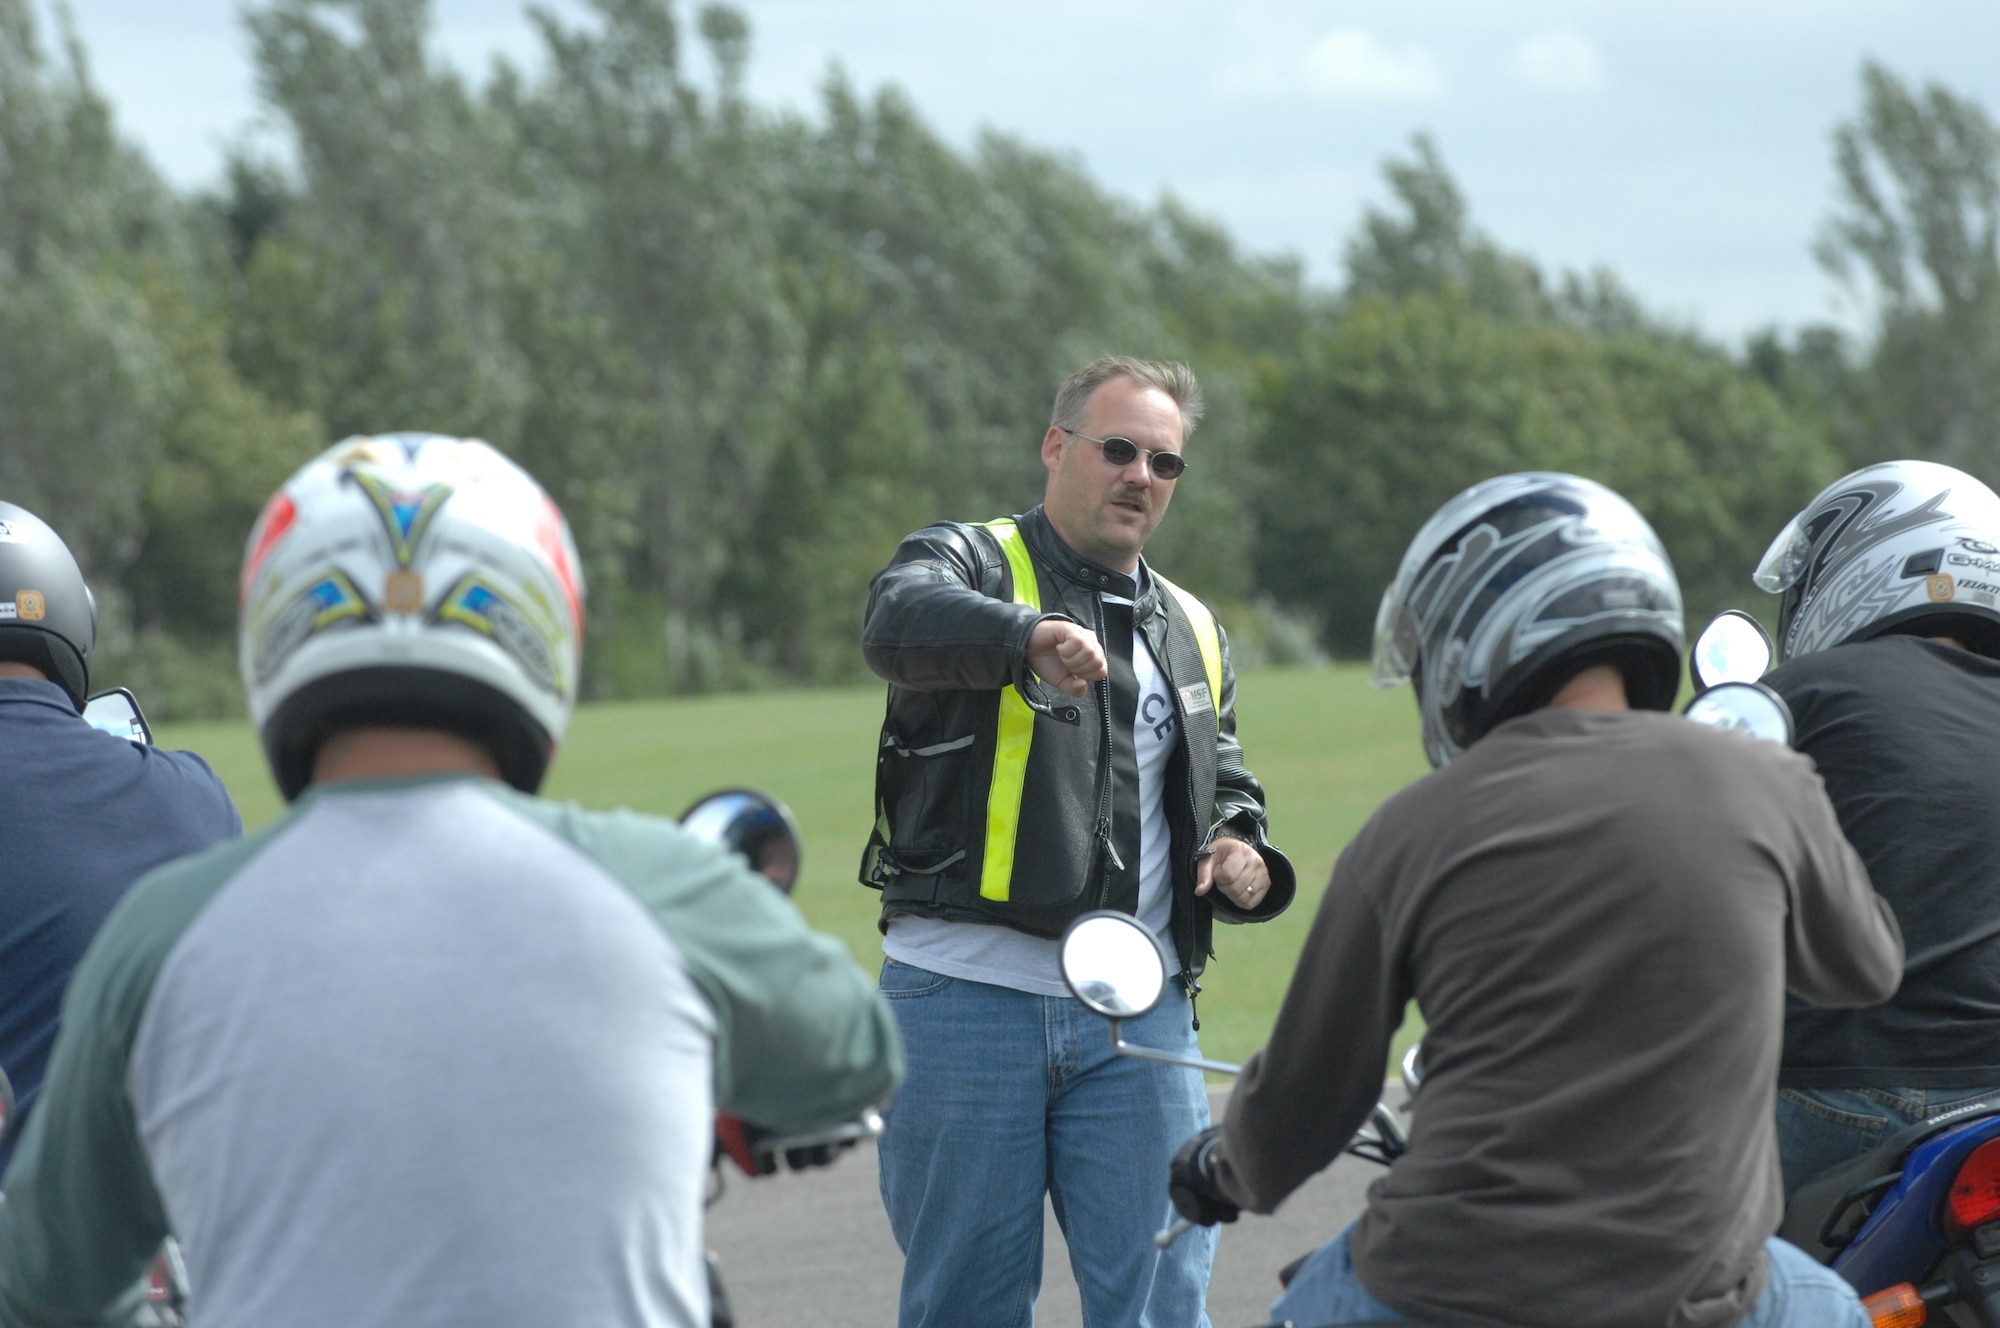 Master Sgt. Brian Niemi instructs a basic motorcycle riders course at RAF Feltwell Aug. 1. Local Motorcycle Safety Foundation instructors offer a variety of basic and experienced rider courses throughout the summer. All Airmen must have completed one of these courses every three years or they are not authorized to ride a motorcycle. (U.S. Air Force photo by Master Sgt. Charles Tubbs)